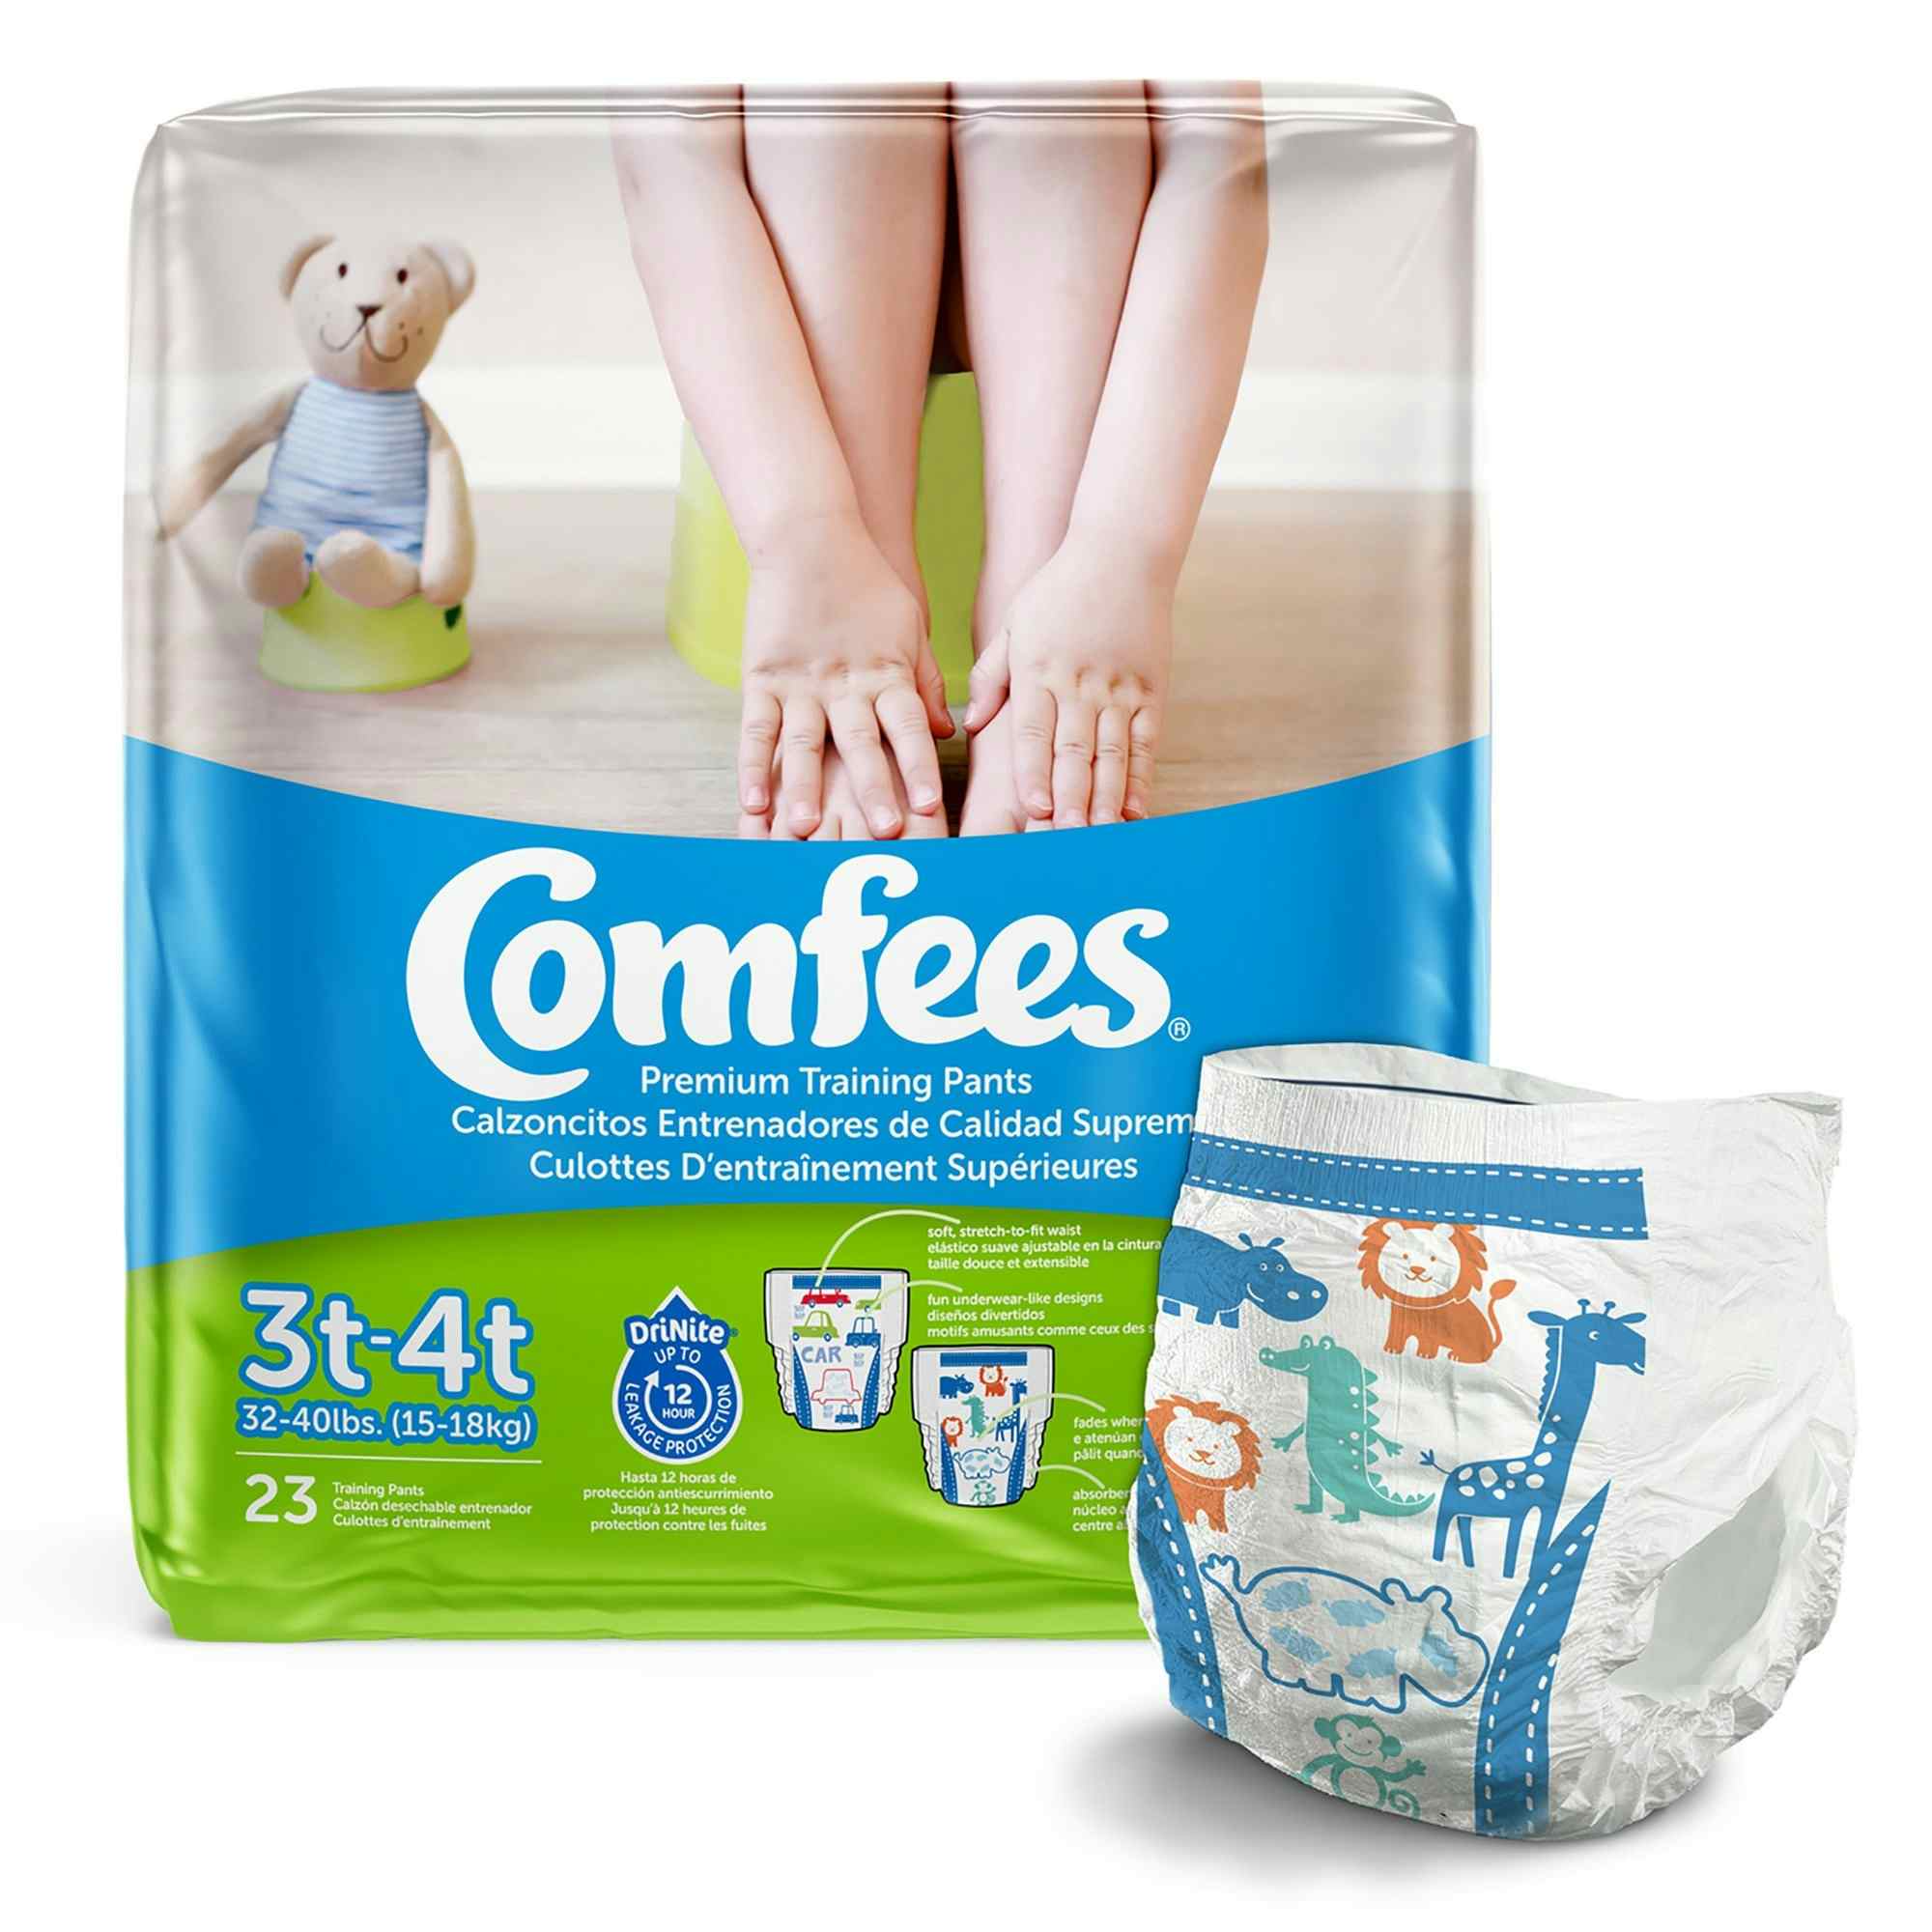 Comfees Toddler Premium Training Pants, Moderate Absorbency, 41545, 3T to 4T (32 - 40 lbs.) - Boy - Case of 138 (6 Bags)